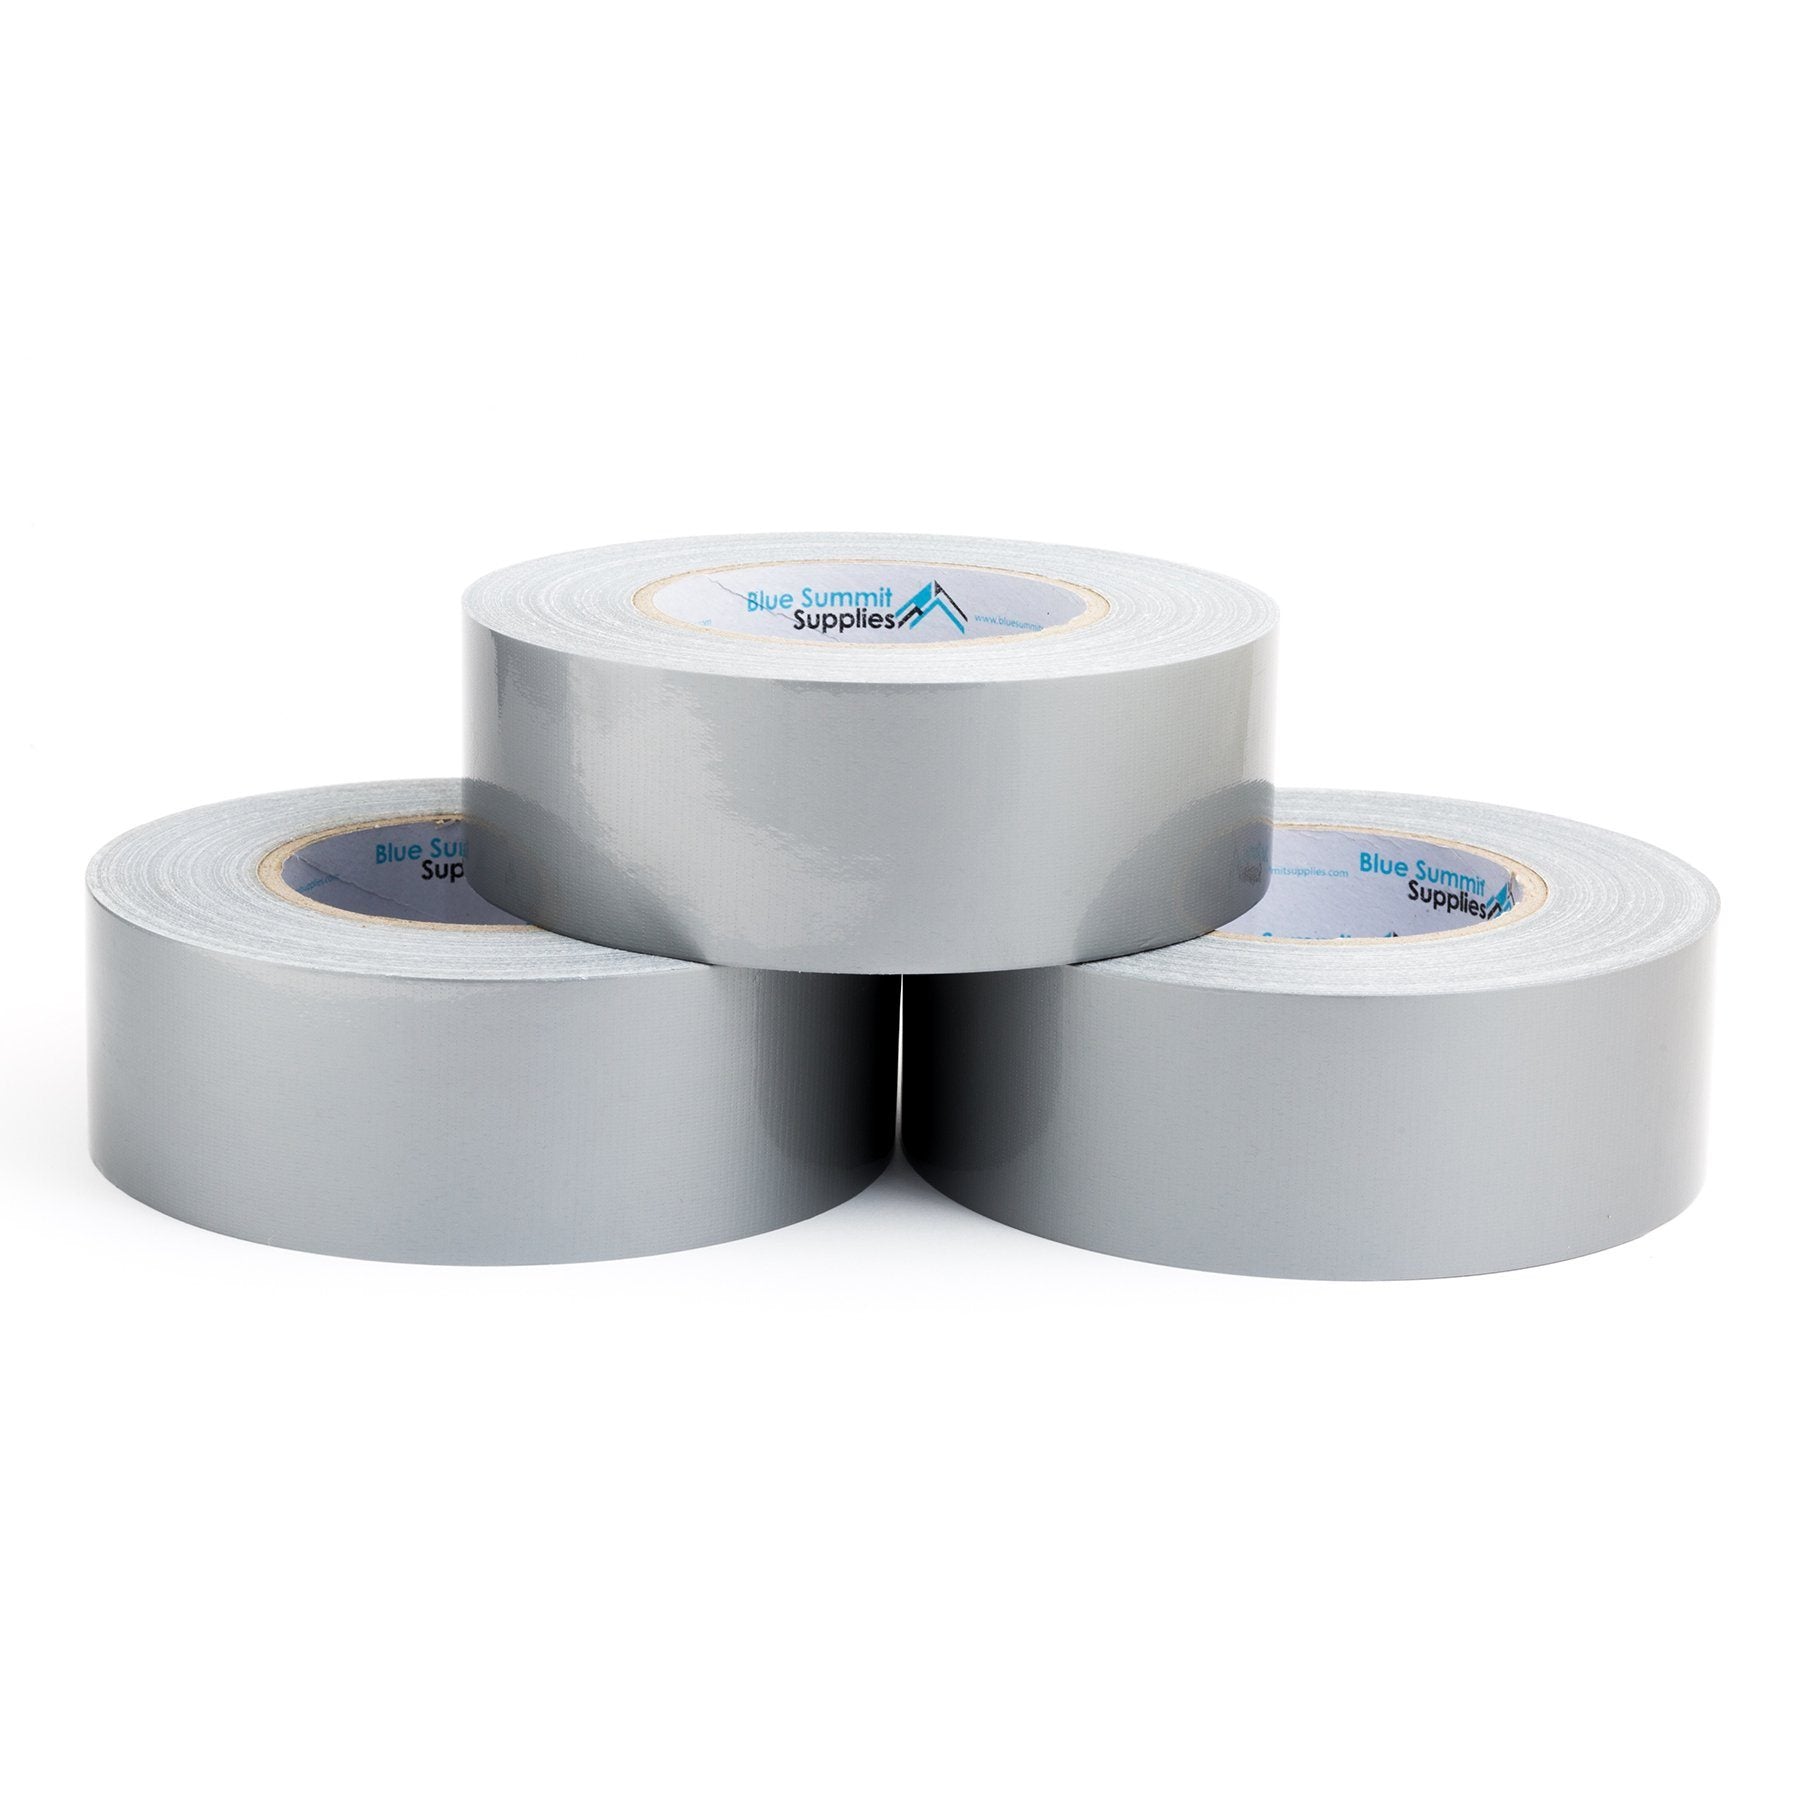 3 Pack Duct Tape, Tear by Hand Design, Silver, Strong 7.3mil Thickness, Designed for Home and Office Use with Commercial Grade Strength, 60 Yard